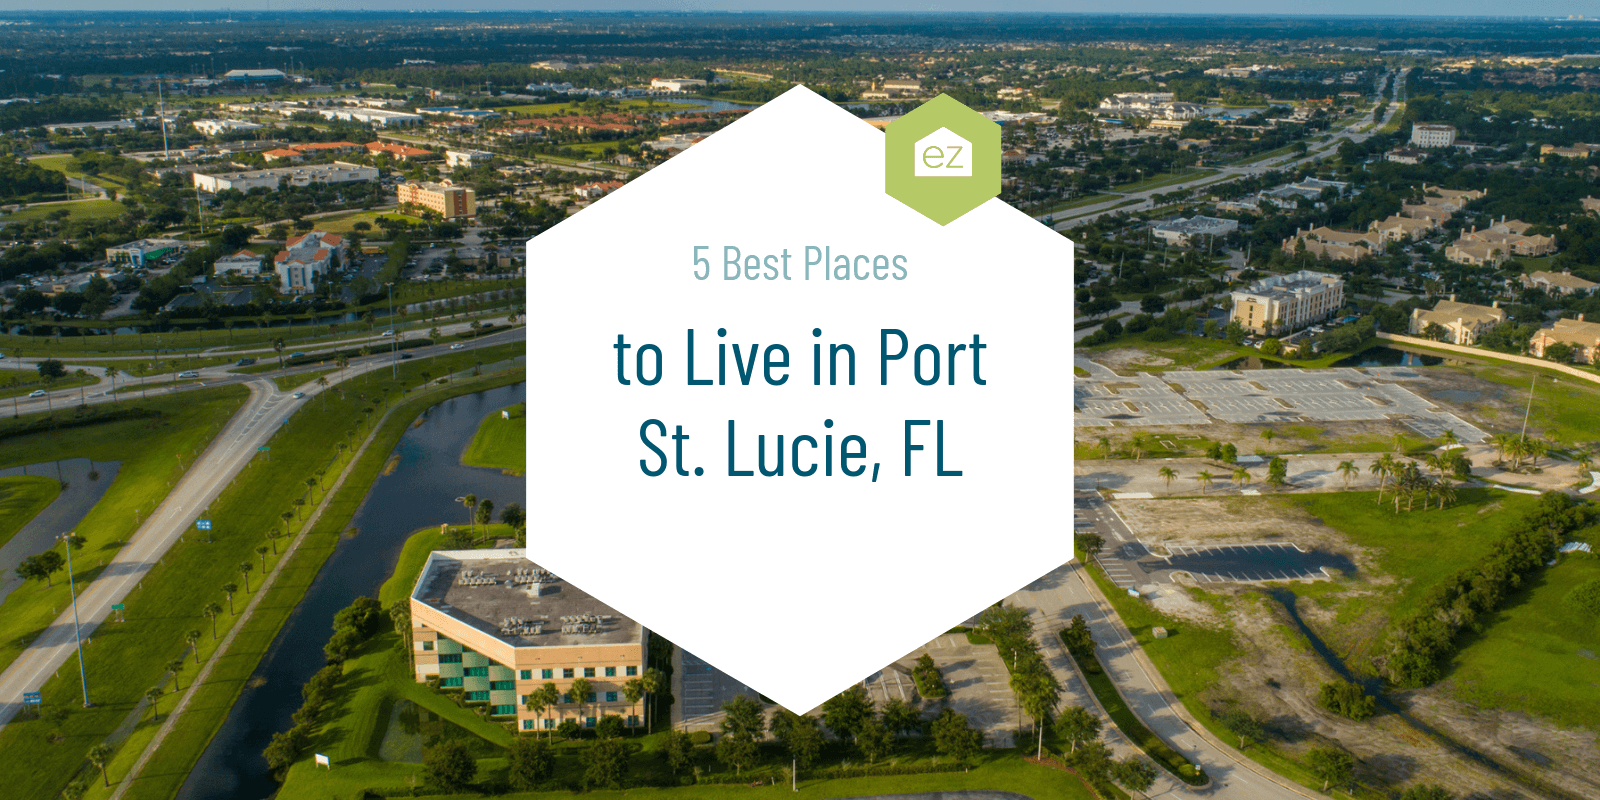 5 Best Places to Live in Port St. Lucie, FL